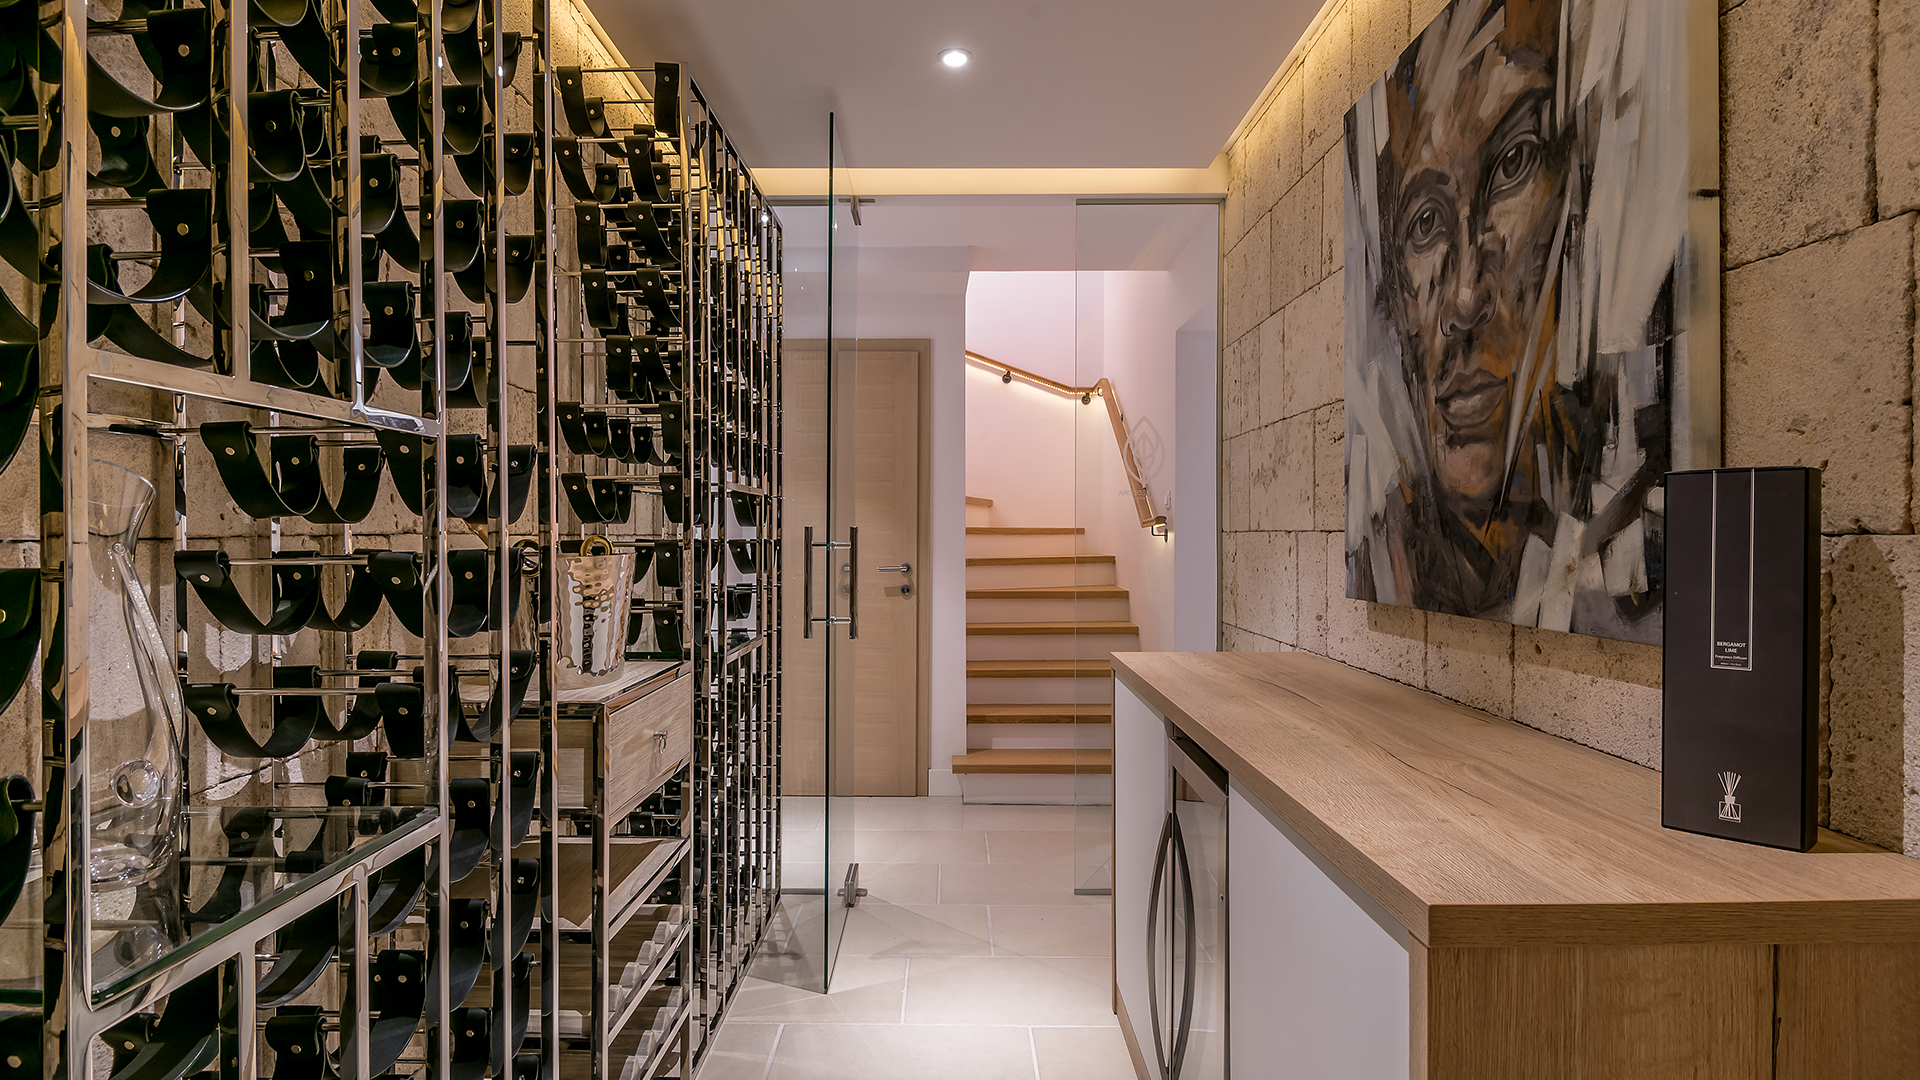 The wine cellar and the decorative art image.